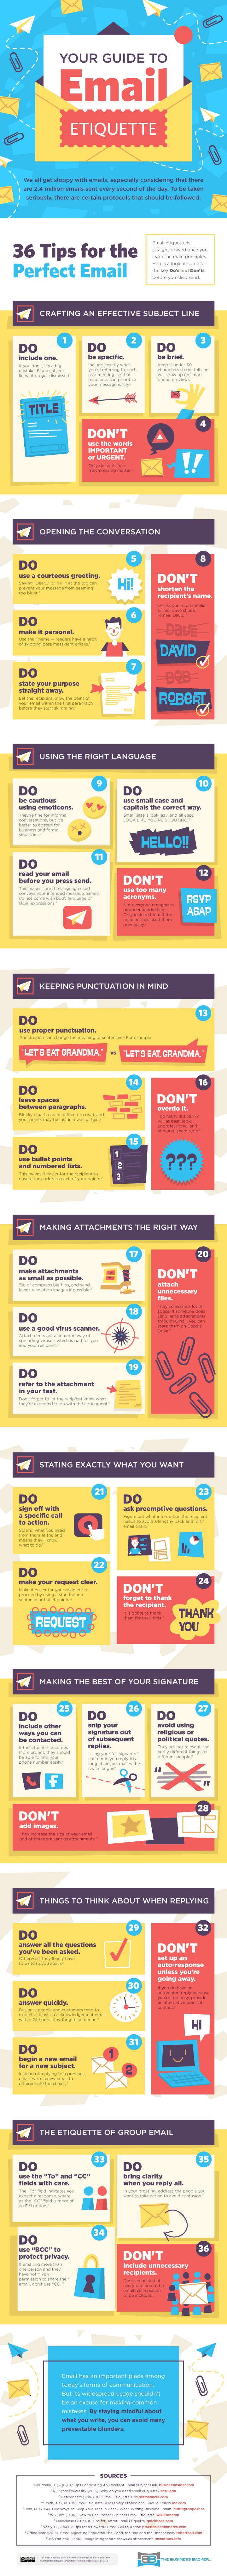 The 36 Fundamentals of Email Etiquette